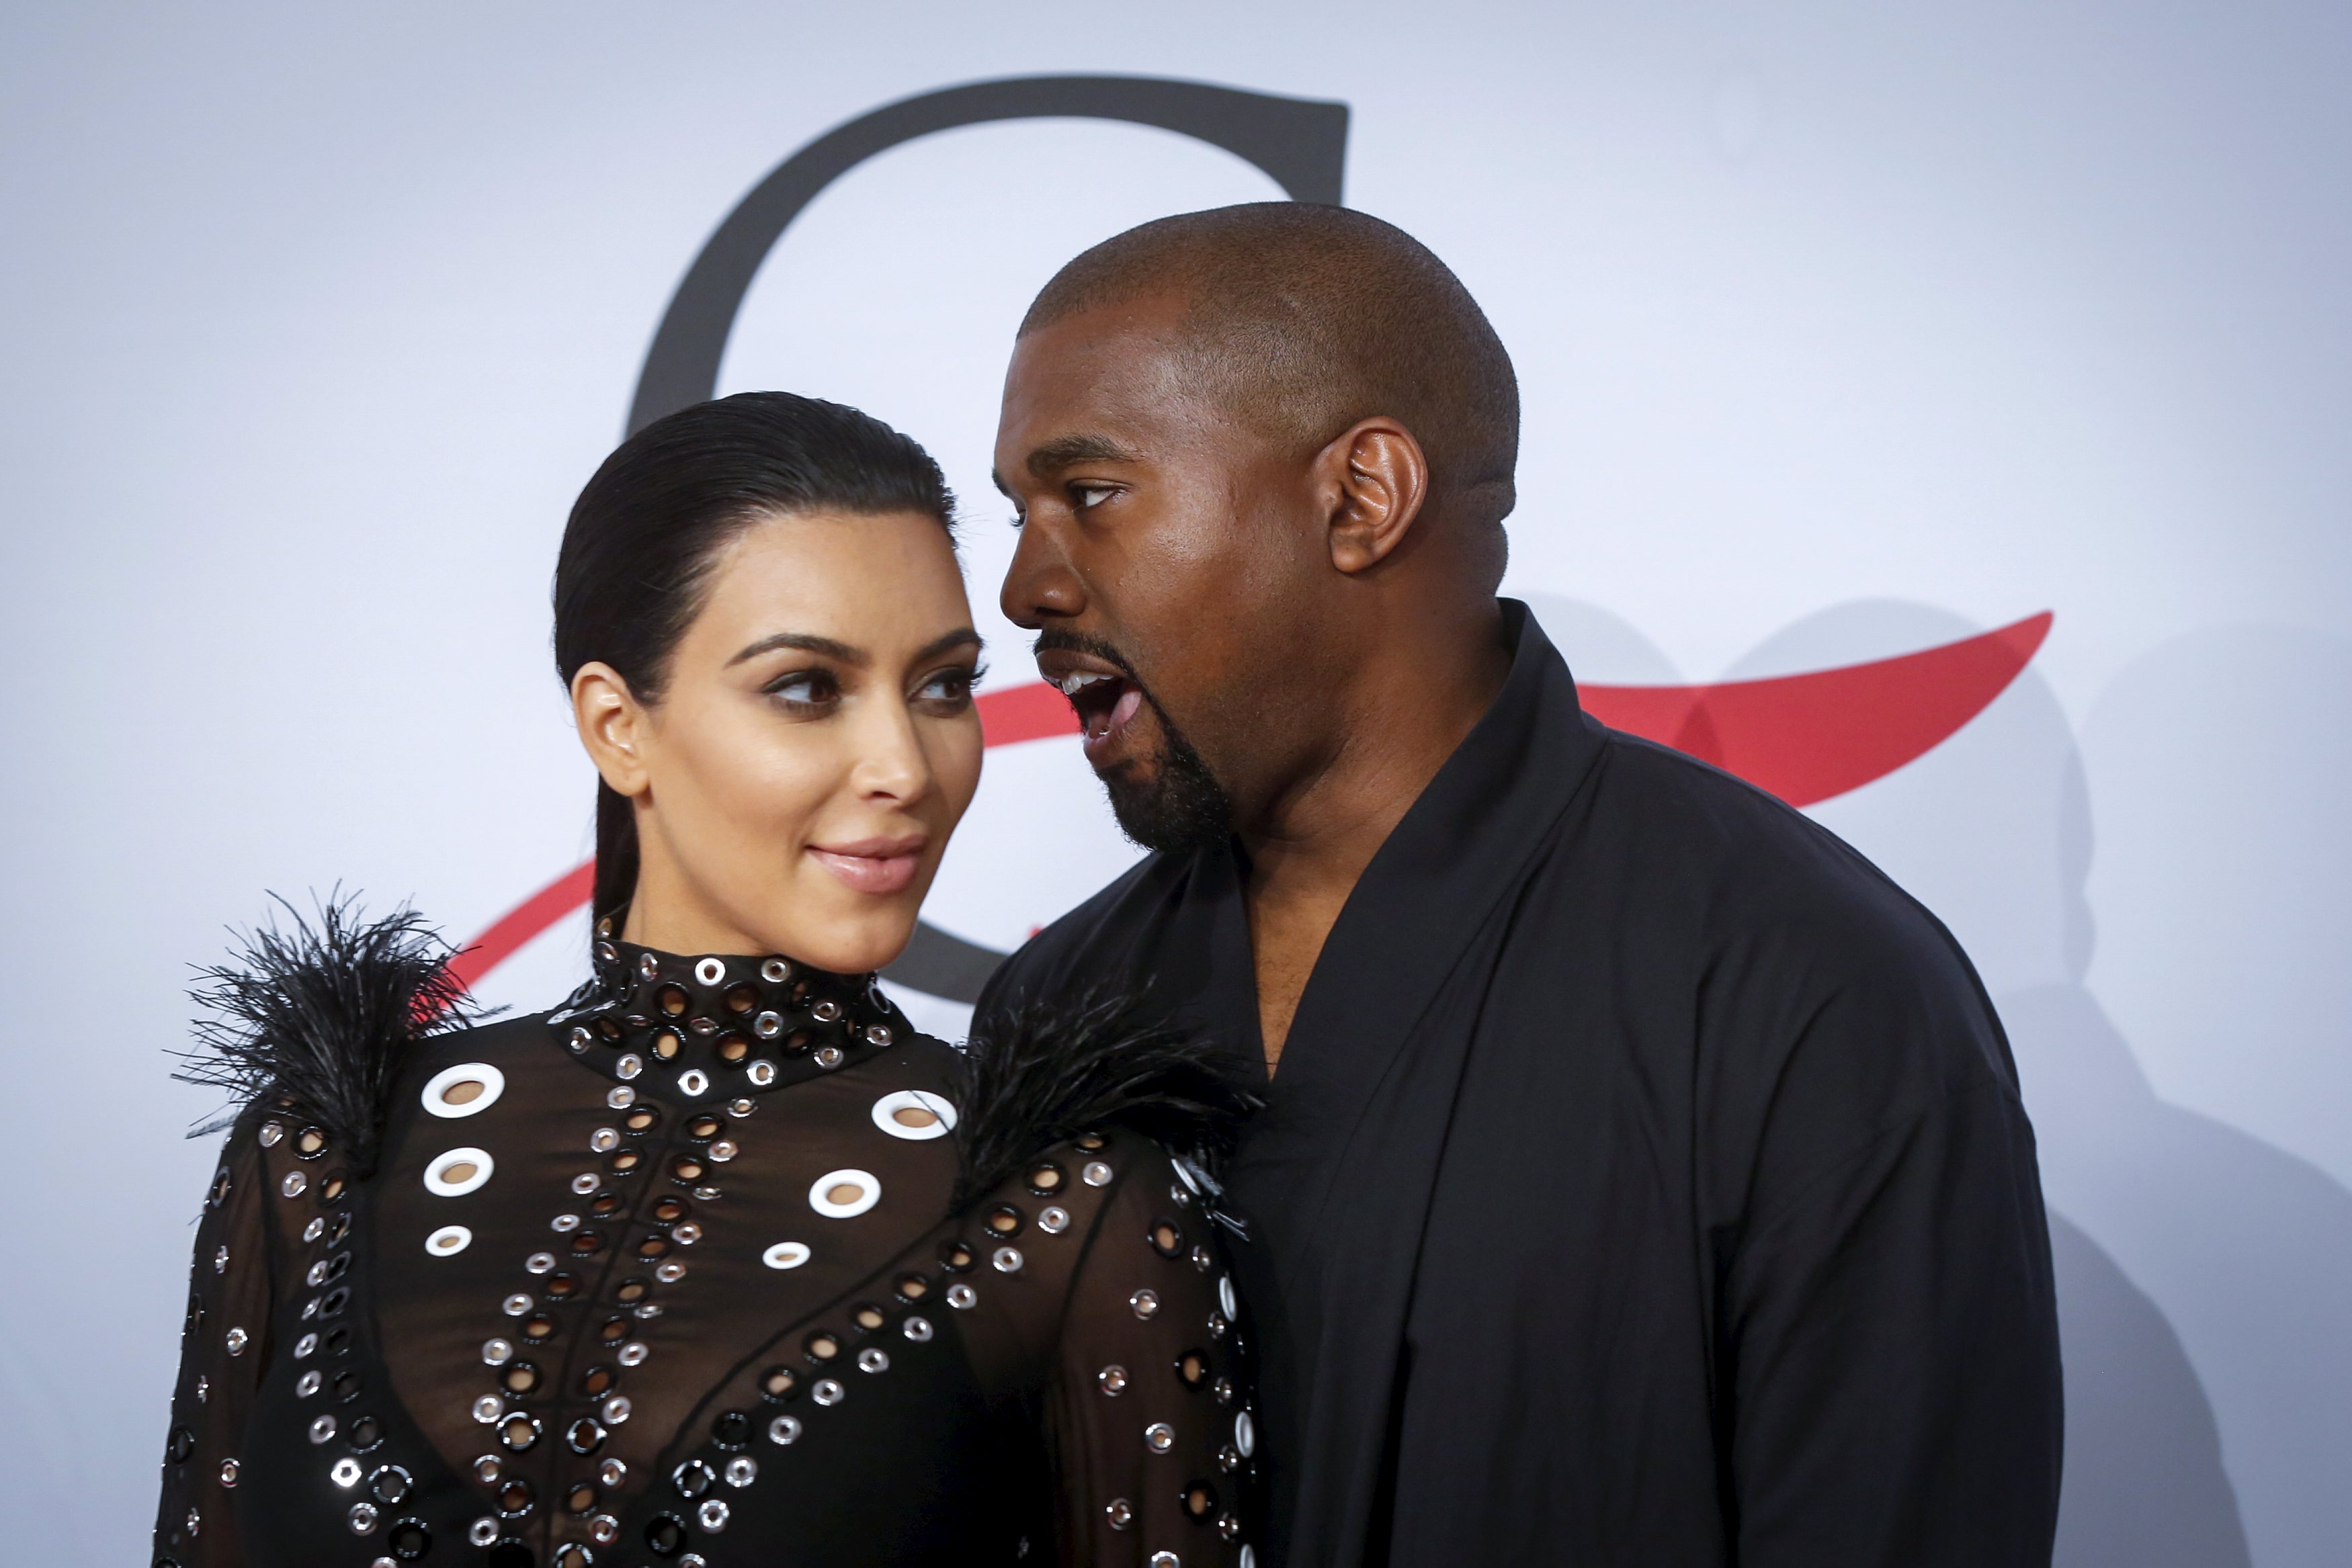 Television personality Kim Kardashian arrives with Kanye West to attend the 2015 CFDA Fashion Awards in New York. Photo: Reuters